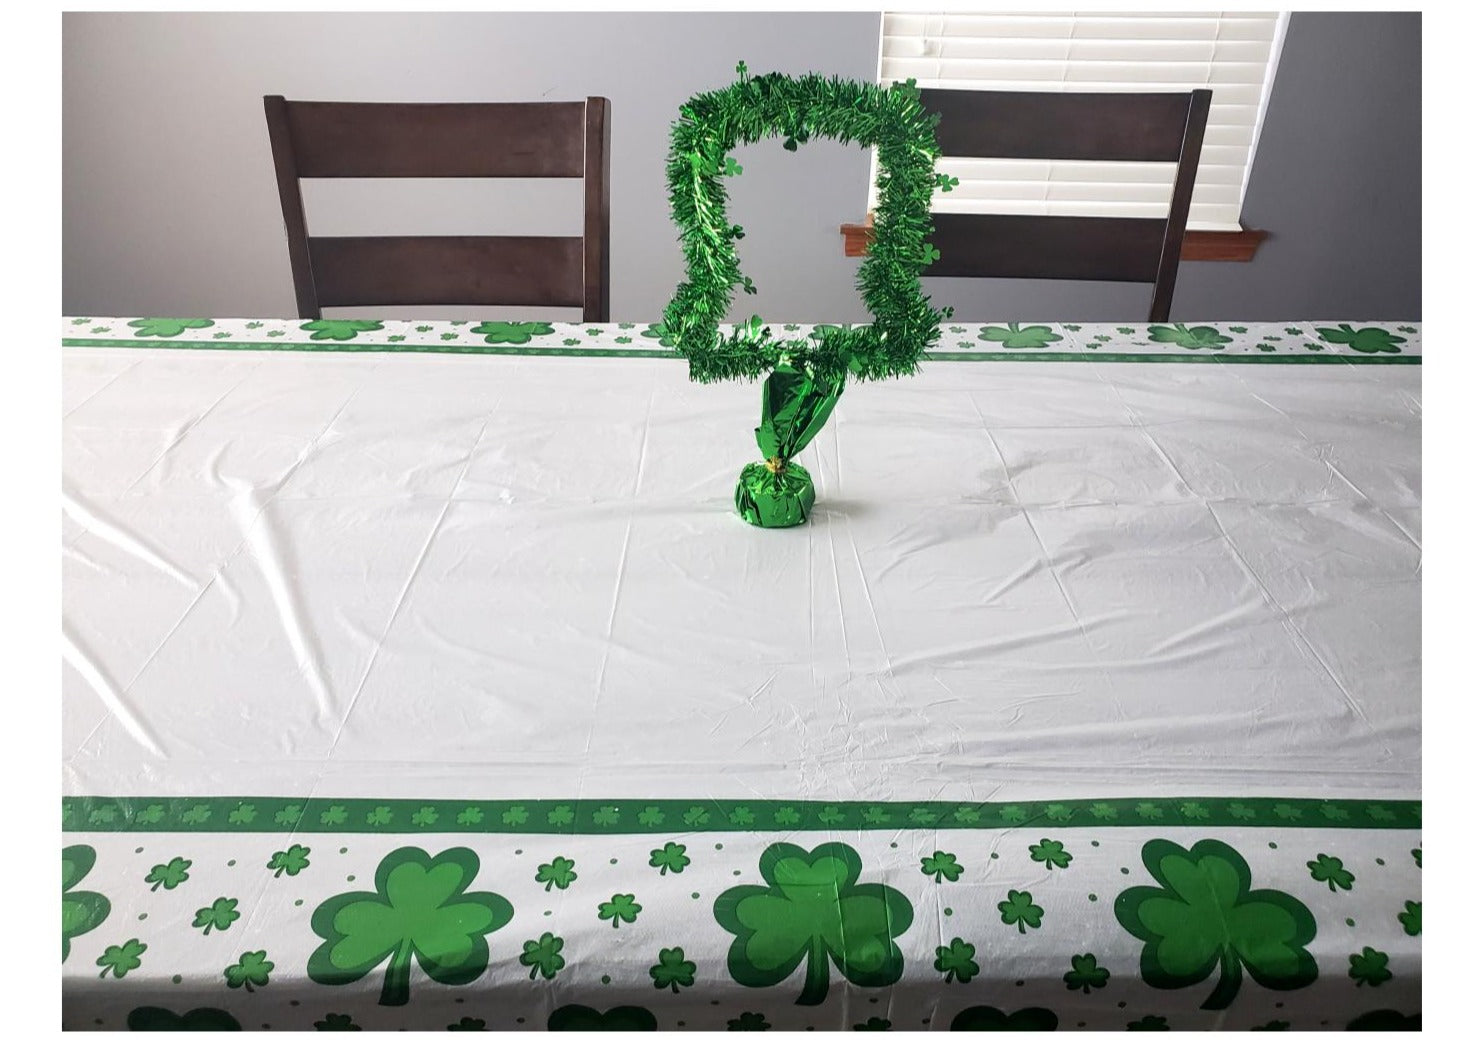 St. Patrick’s Day Tinsel Leprechaun Hat Centerpiece and Plastic Table Cover Combo